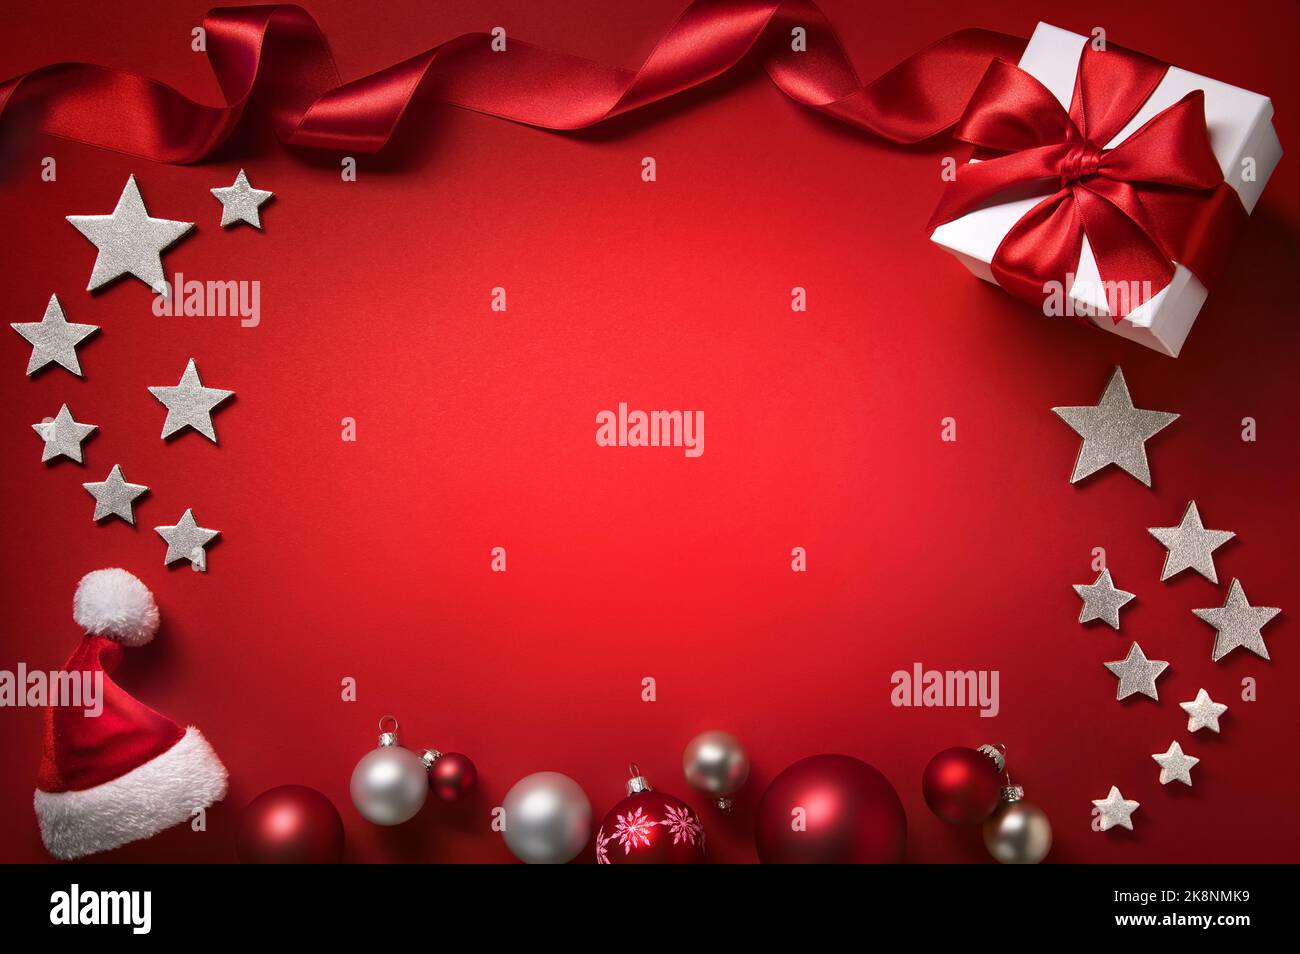 Christmas background in red, with a frame composed of baubles, gift box, stars, ribbon and hat, free illuminated copy space Stock Photo